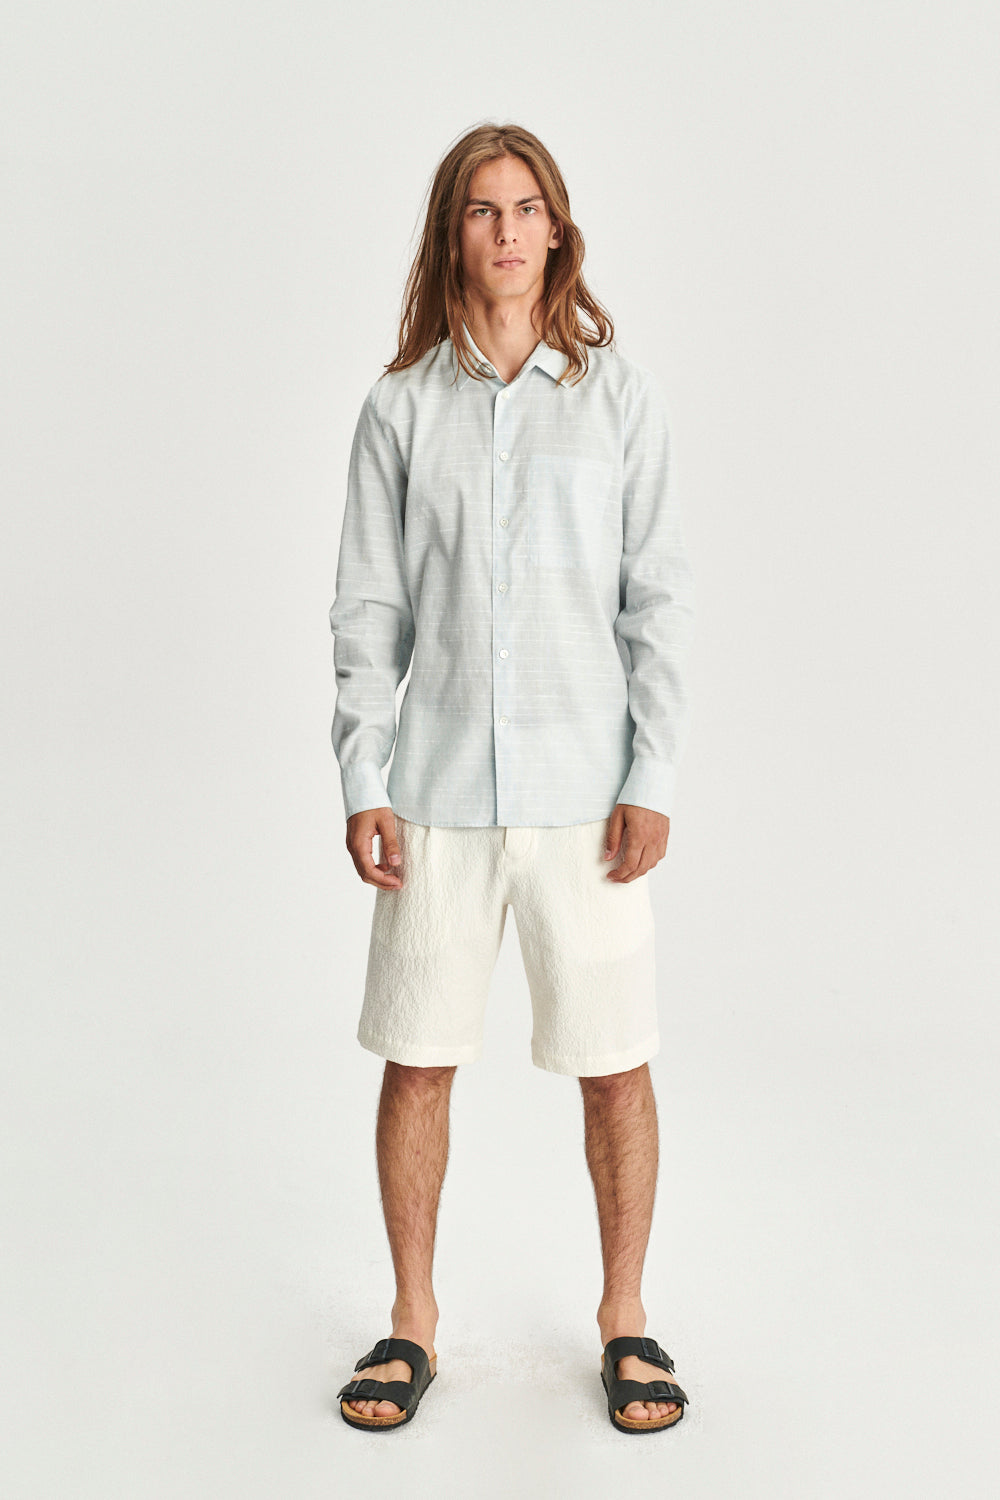 Feel Good Shirt in a Subtle Light Blue Mix of Portuguese Cotton, Linen and Pineapple